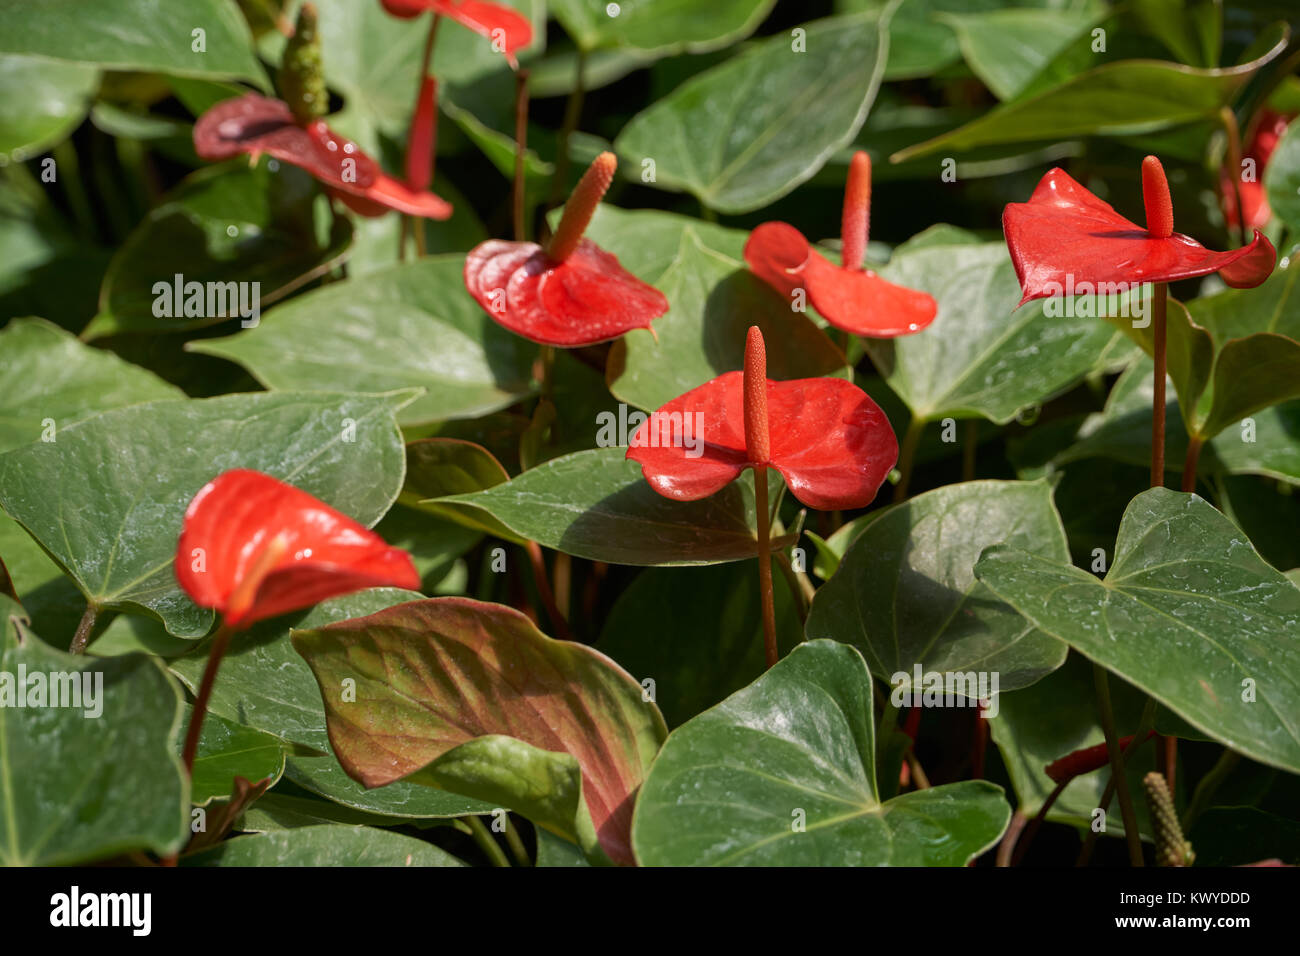 Anthurium andraeanum Linden, a flowering plants in the Araceae family. It is commonly called tailflower, flamingo flower, and laceleaf. Stock Photo